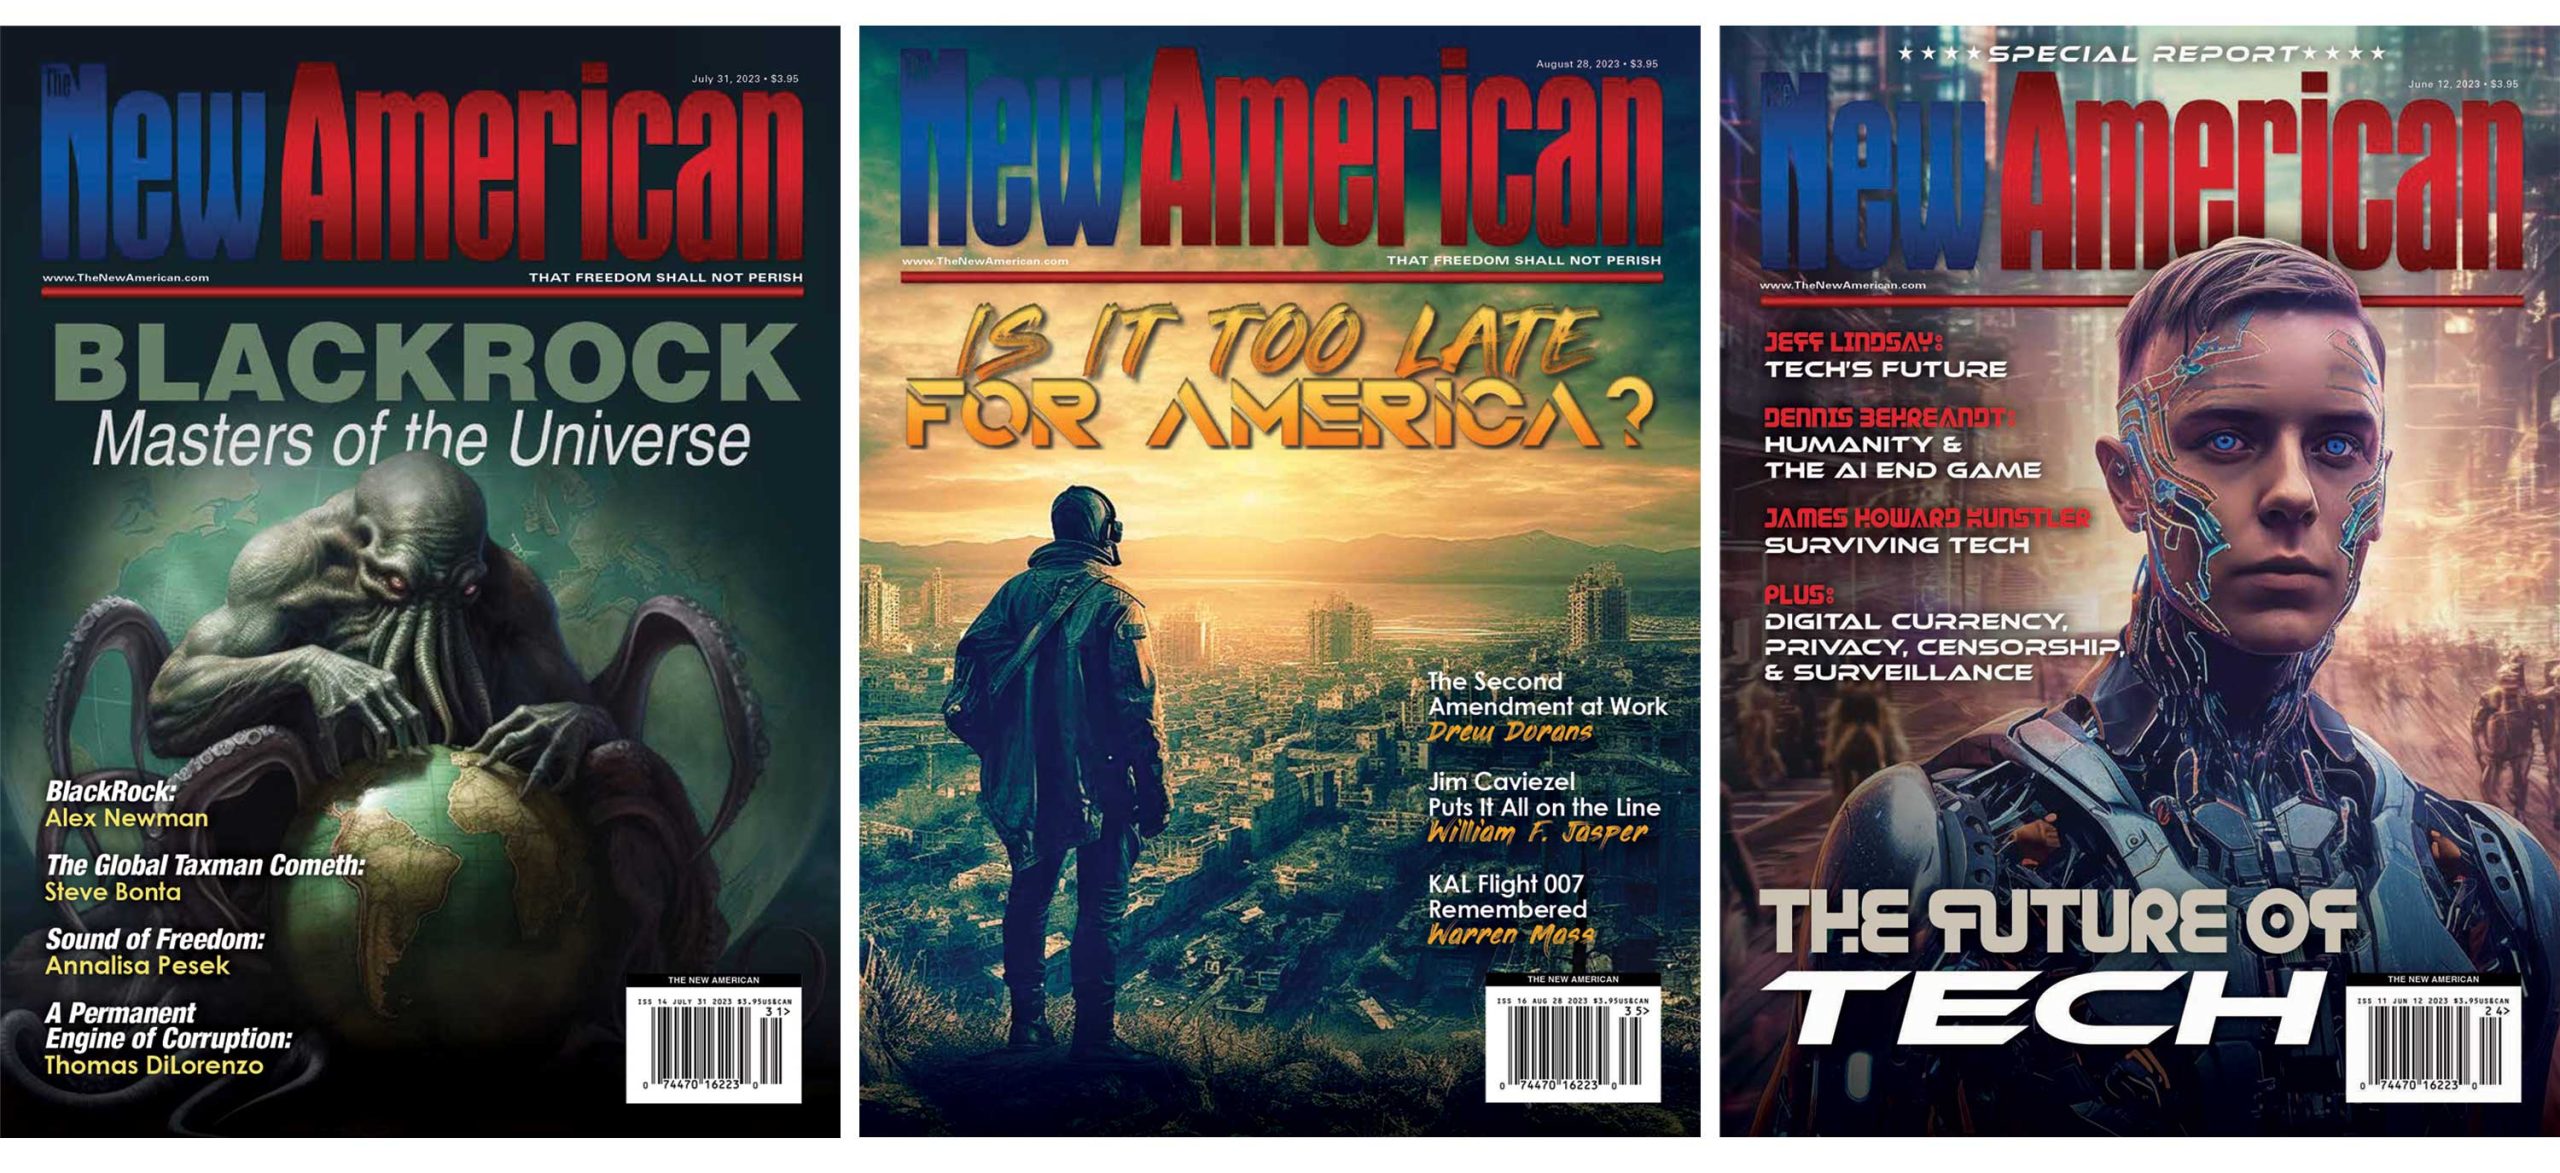 New American covers created with AI graphics.